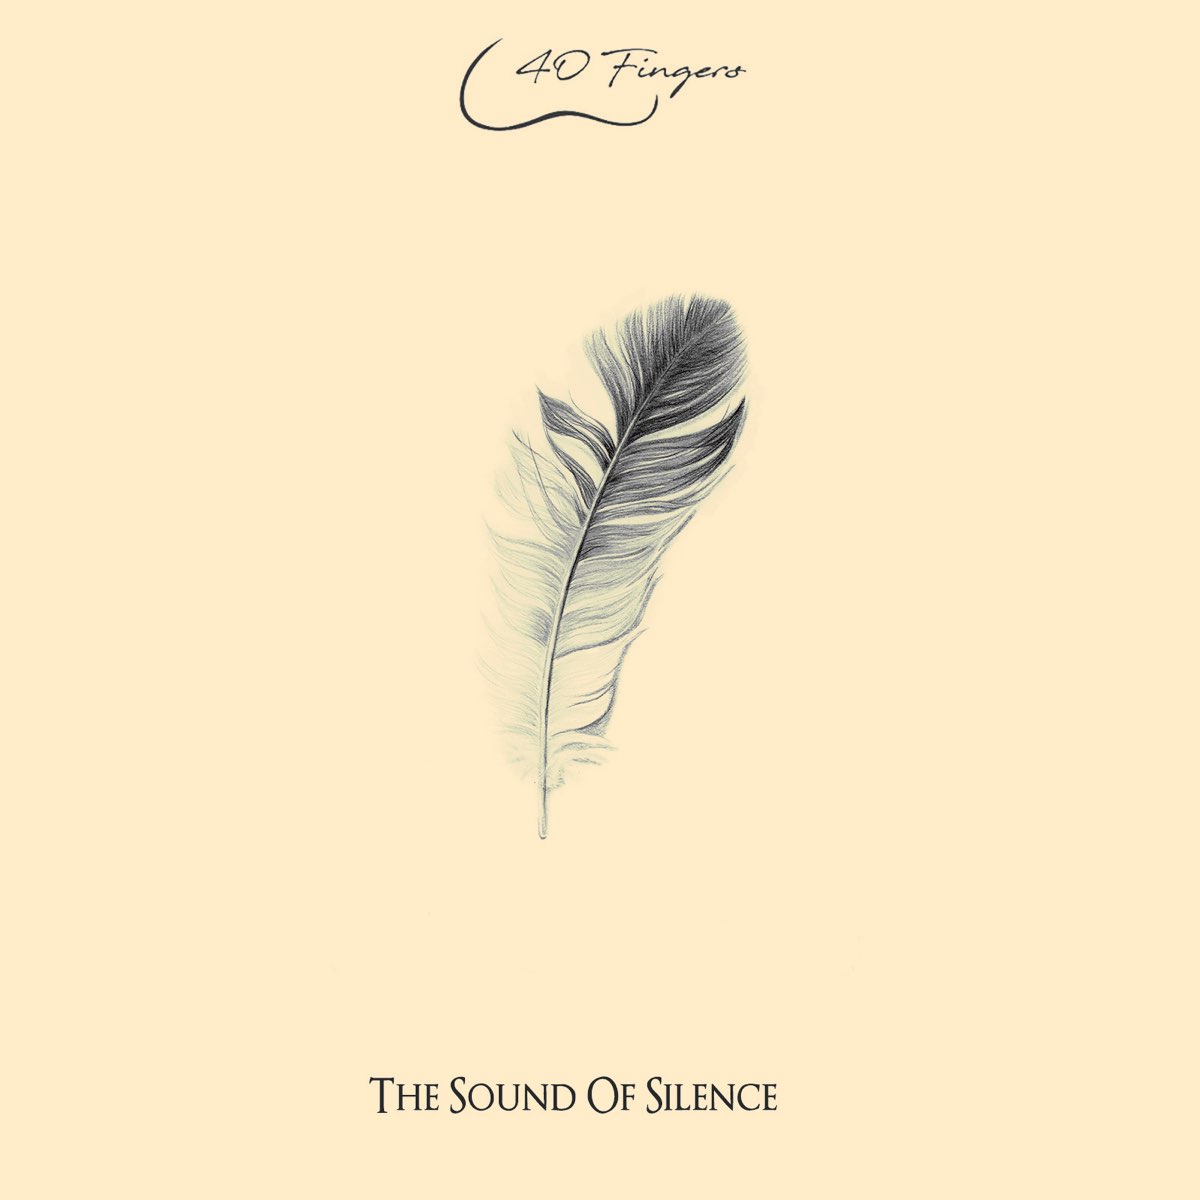 The sound of silence cyril remix слушать. Sound of Silence. Sound of Silence альбом. The Sound of Silence Автор. Альбомы the Sound of Silence 2014.